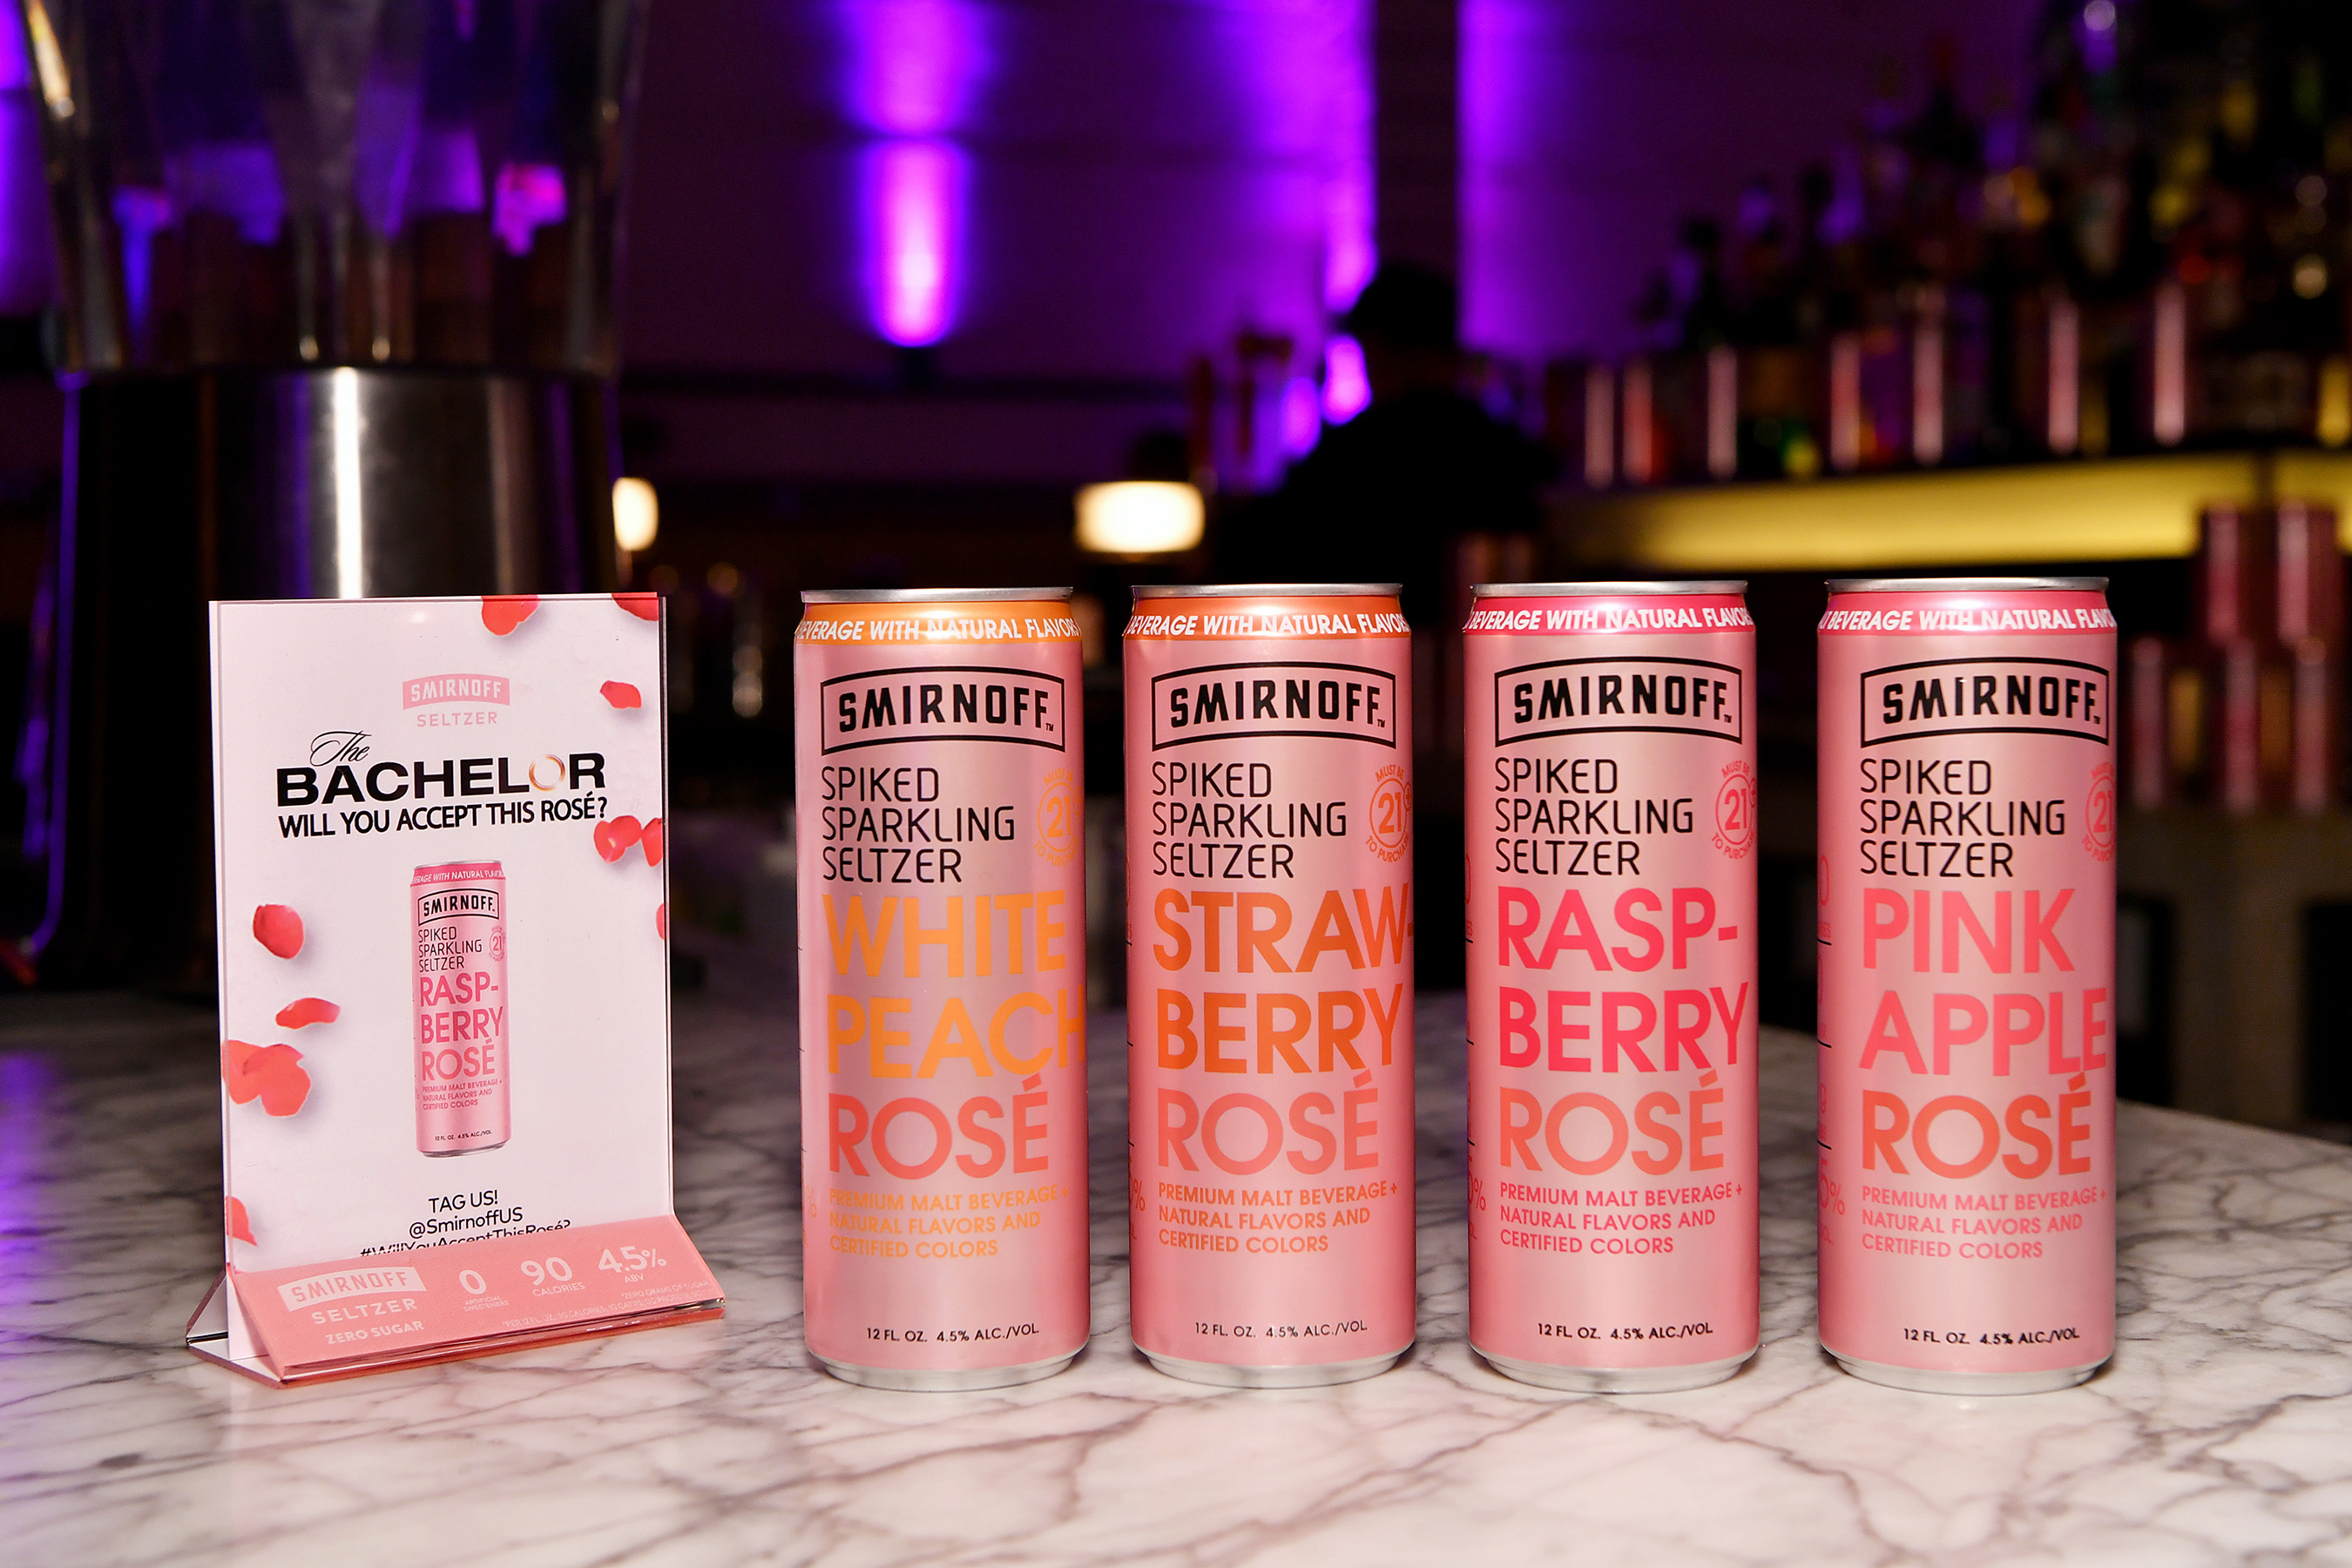 Smirnoff Seltzer launches new 'Will You Accept This Ros?' Campaign on January 13, 2020 in Brooklyn, New York.